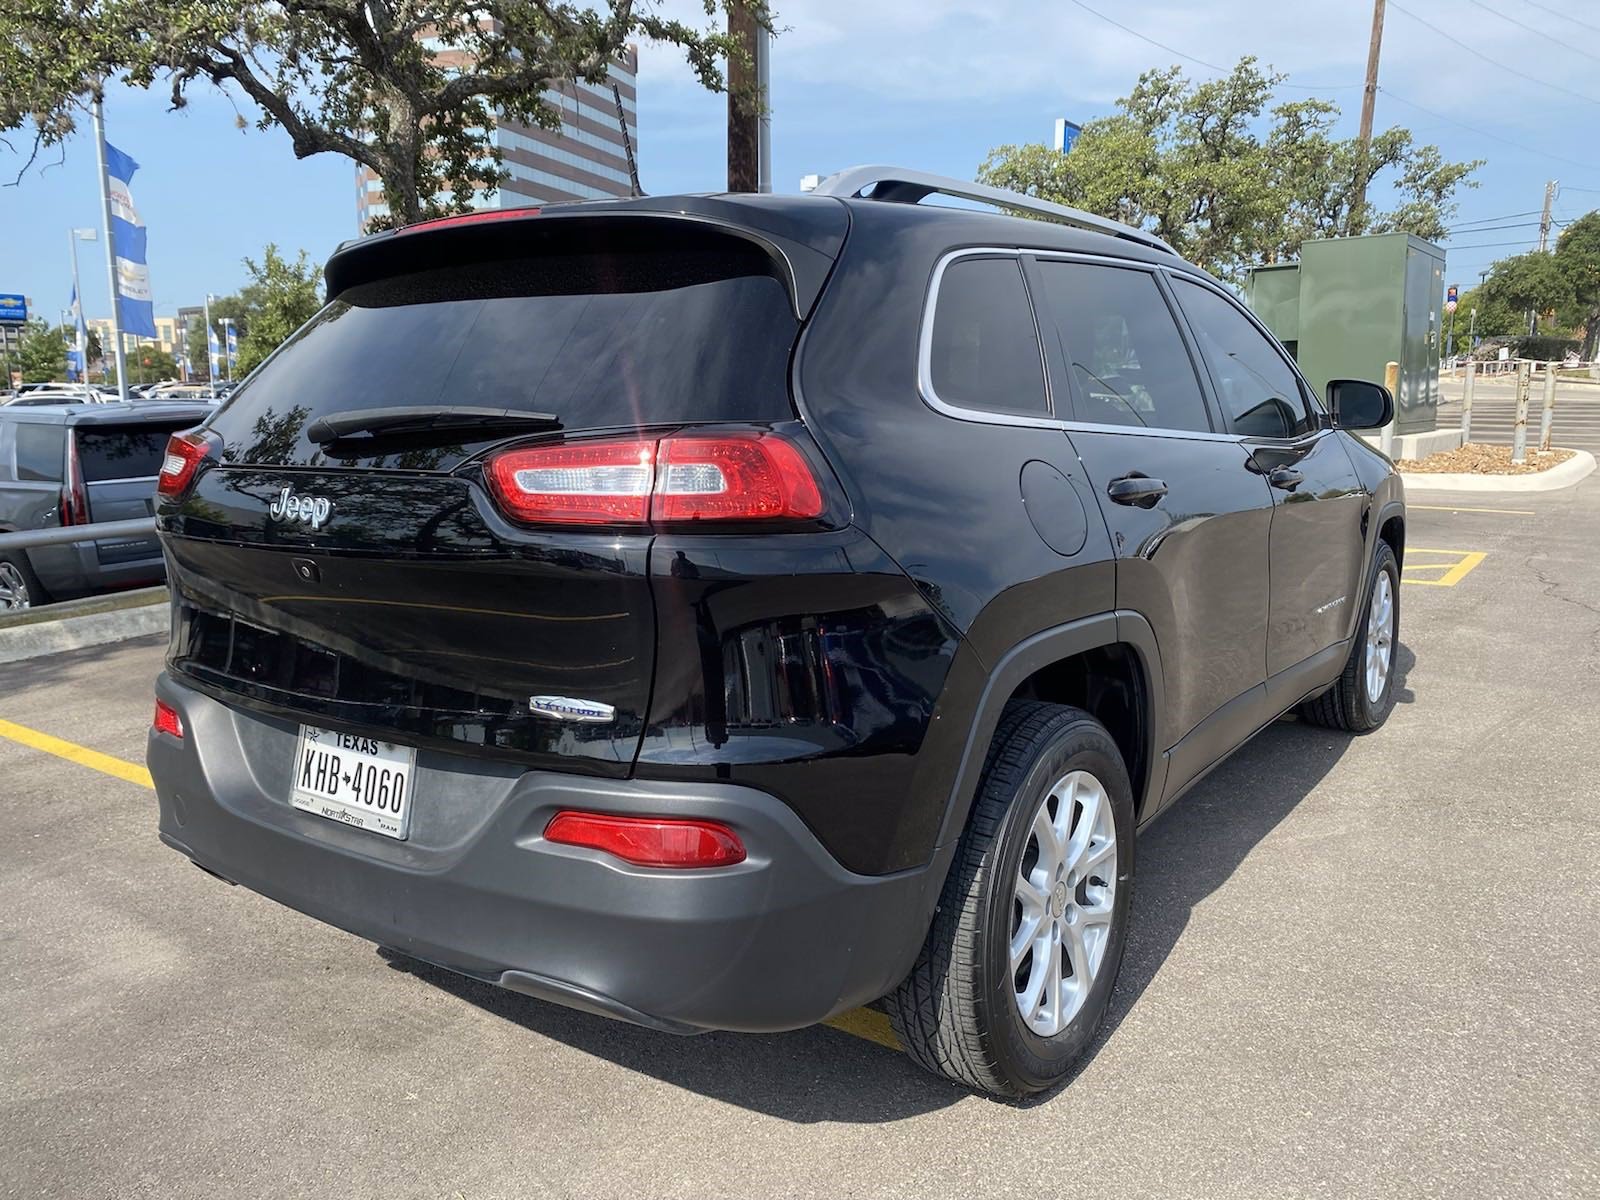 Pre-Owned 2018 Jeep Cherokee Latitude Sport Utility in San Antonio #047452A | Mercedes-Benz of Tire Size For 2018 Jeep Cherokee Latitude